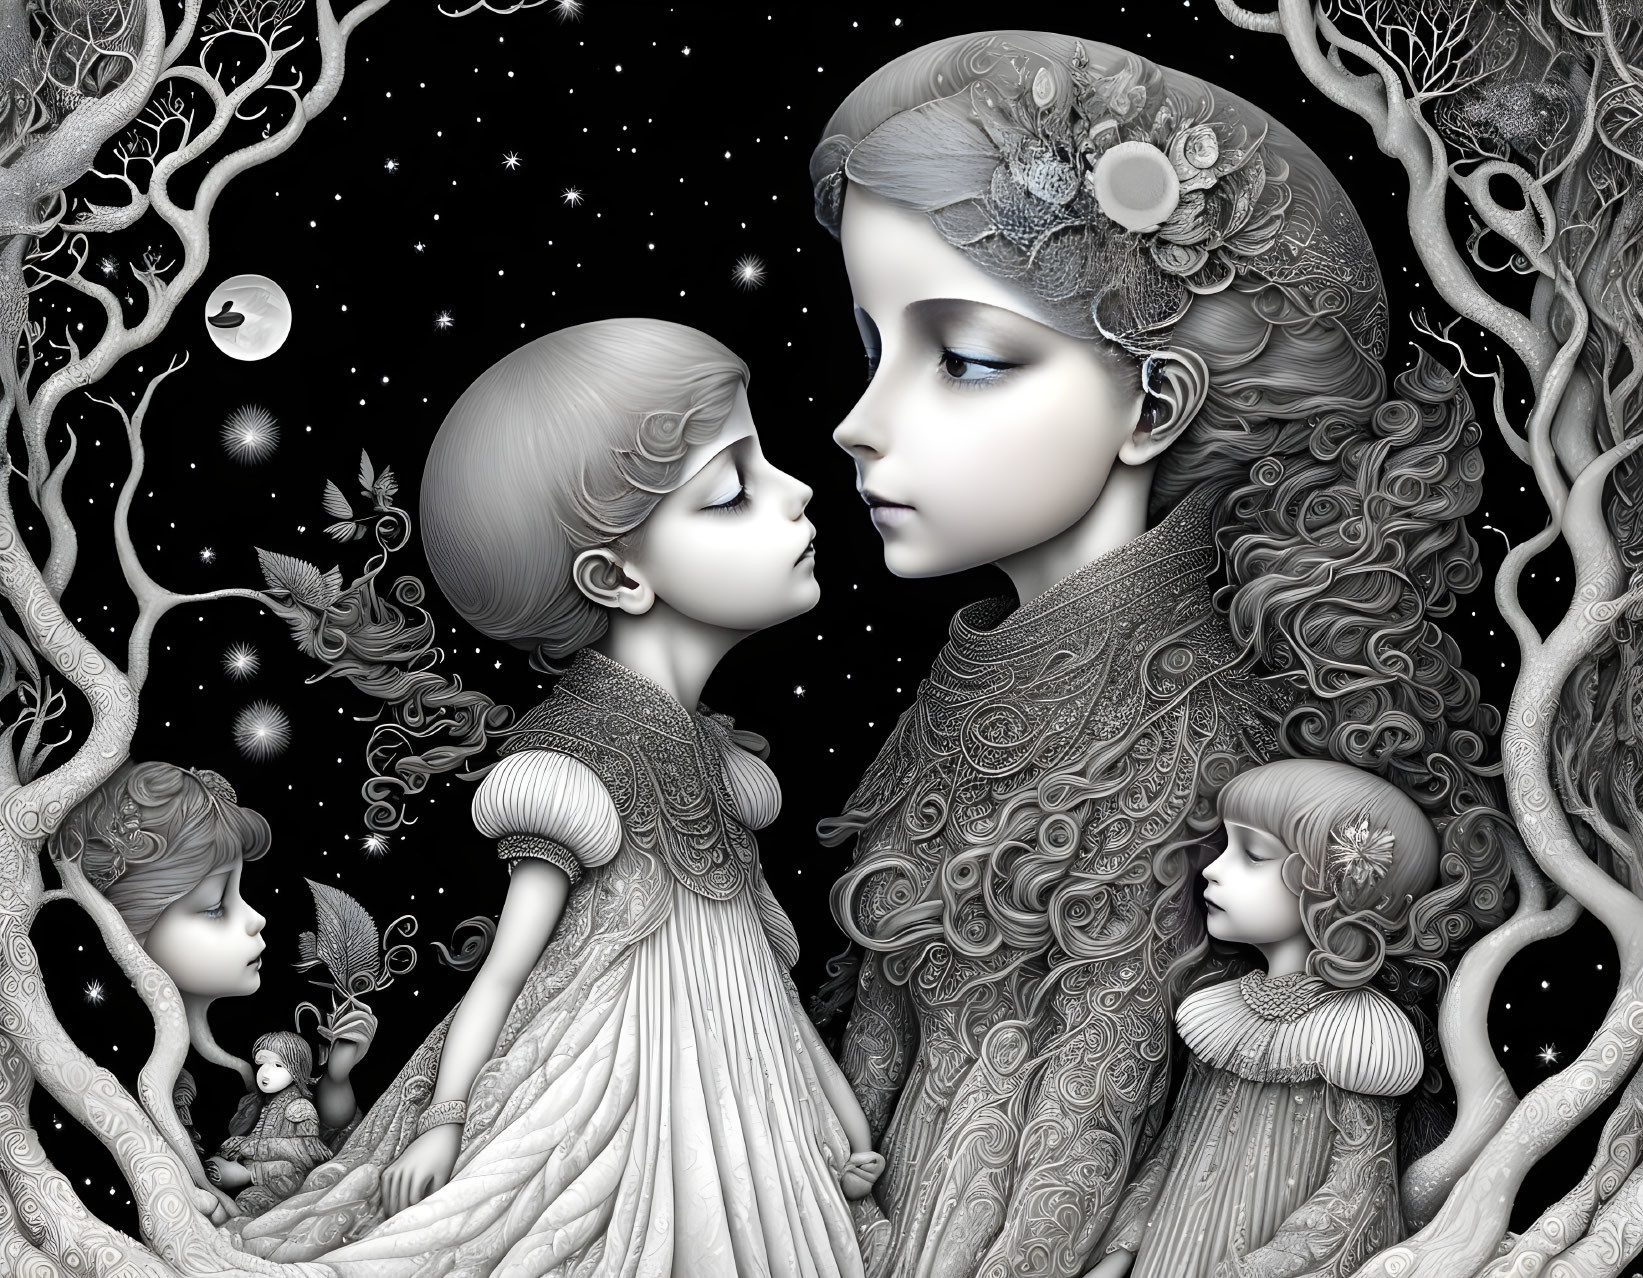 Monochrome fantasy art with central face and celestial backdrop